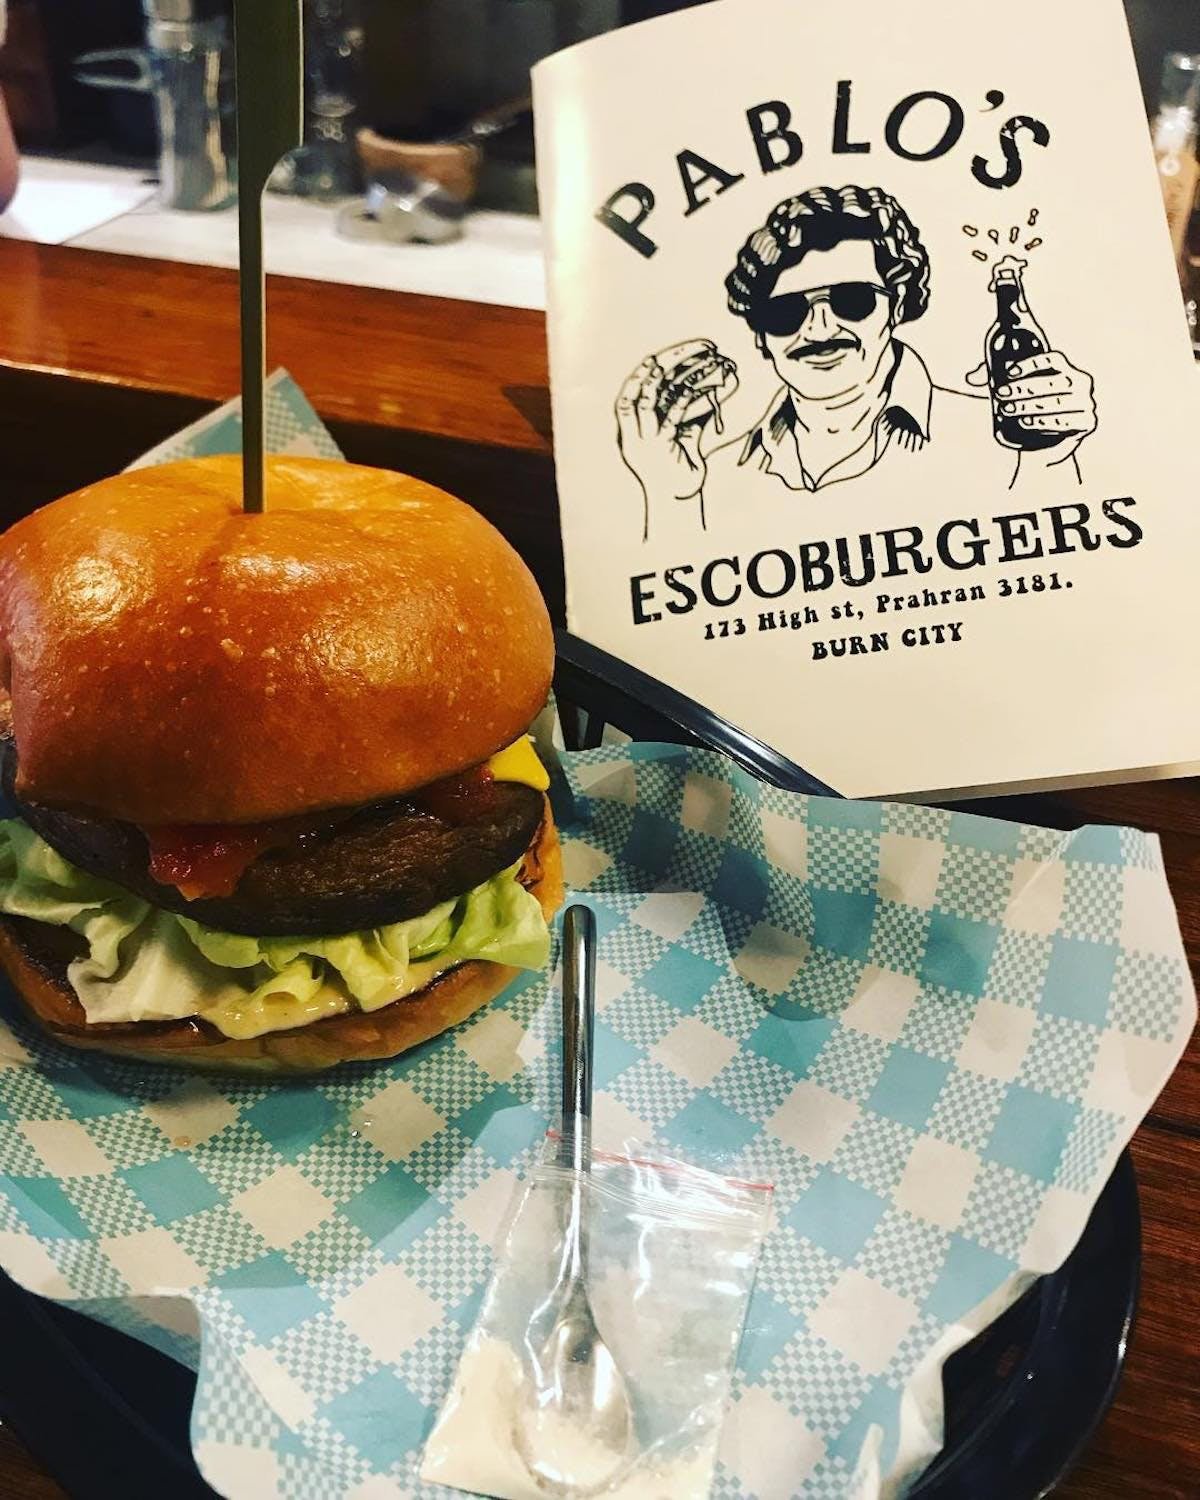 Pablos Escoburgers - Northern Rivers Accommodation